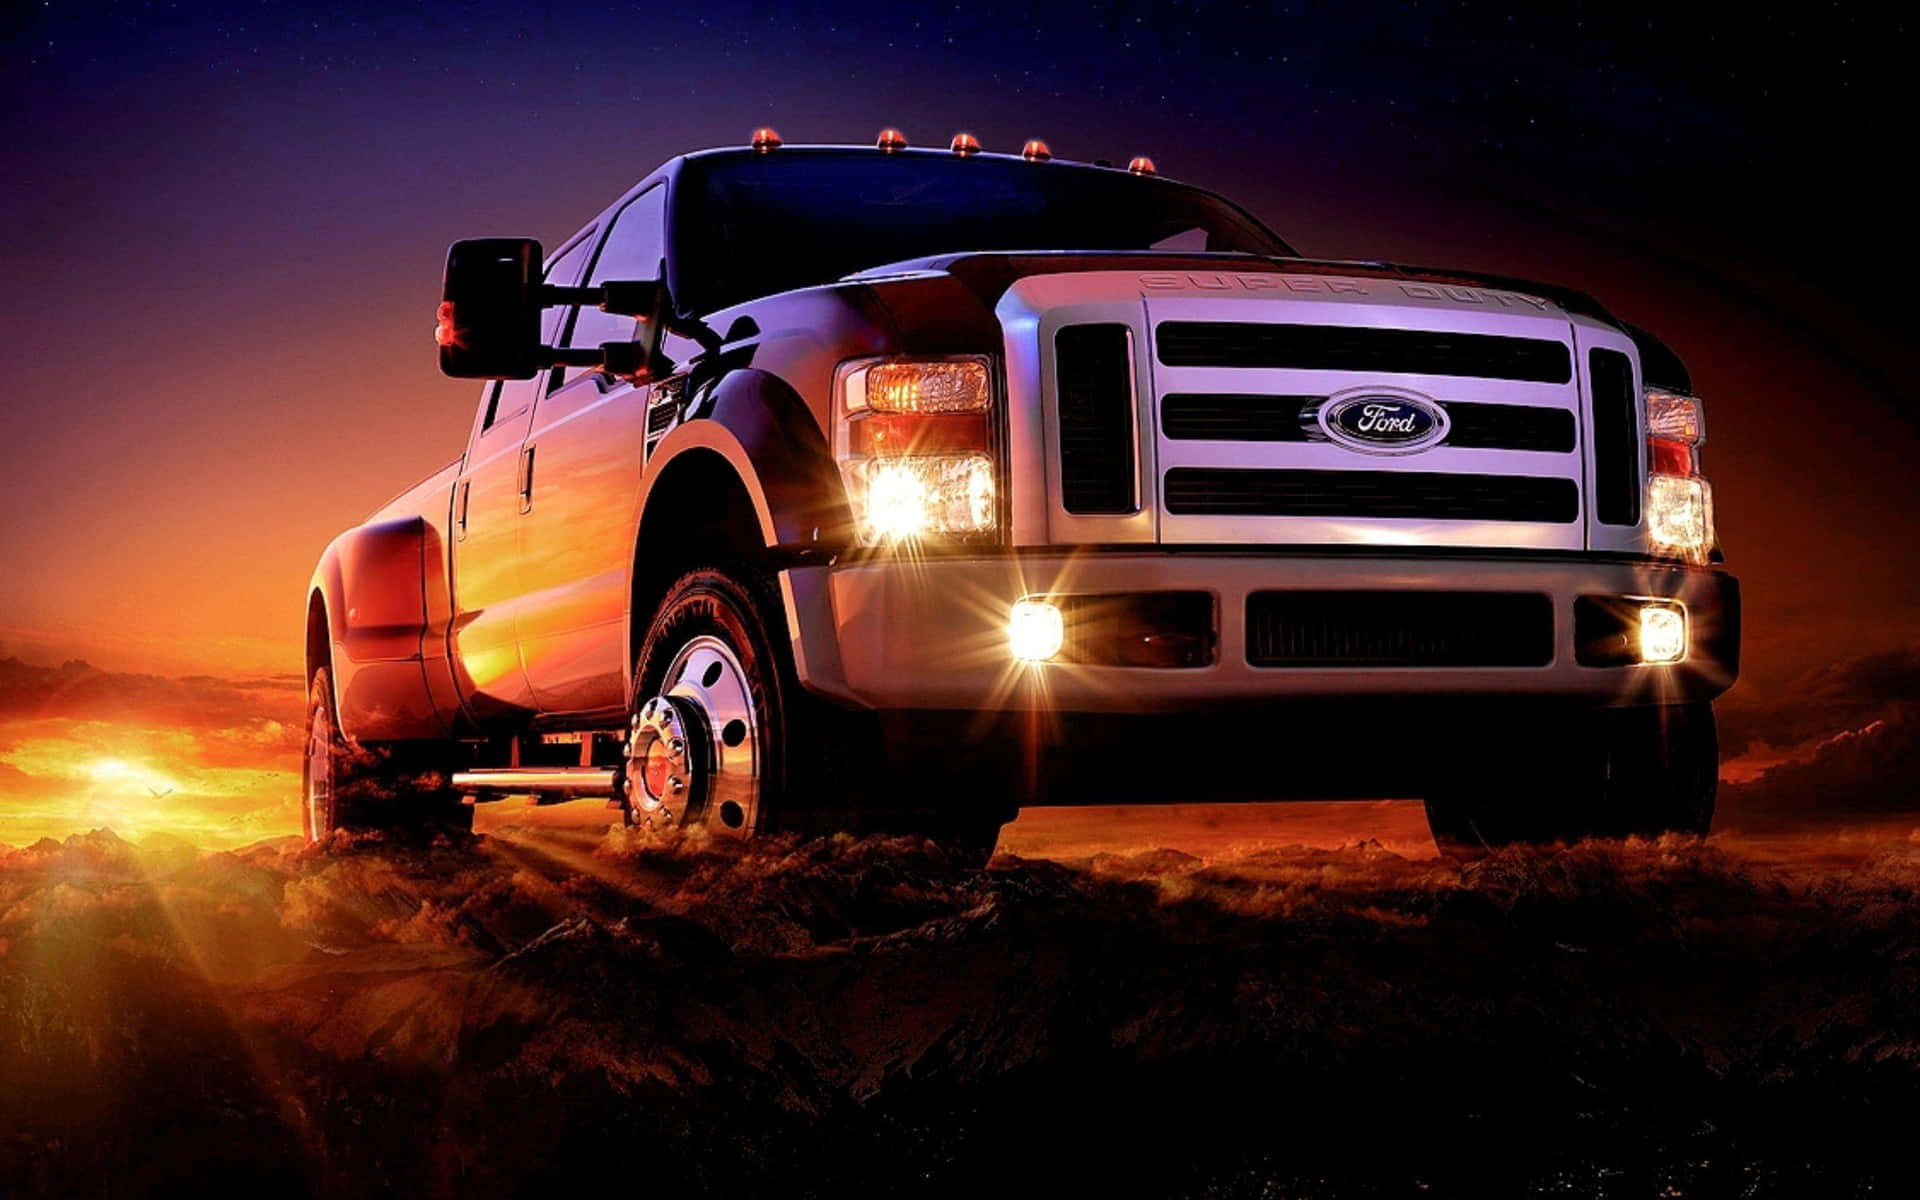 Lifted Truck With Headlights Up-close Wallpaper